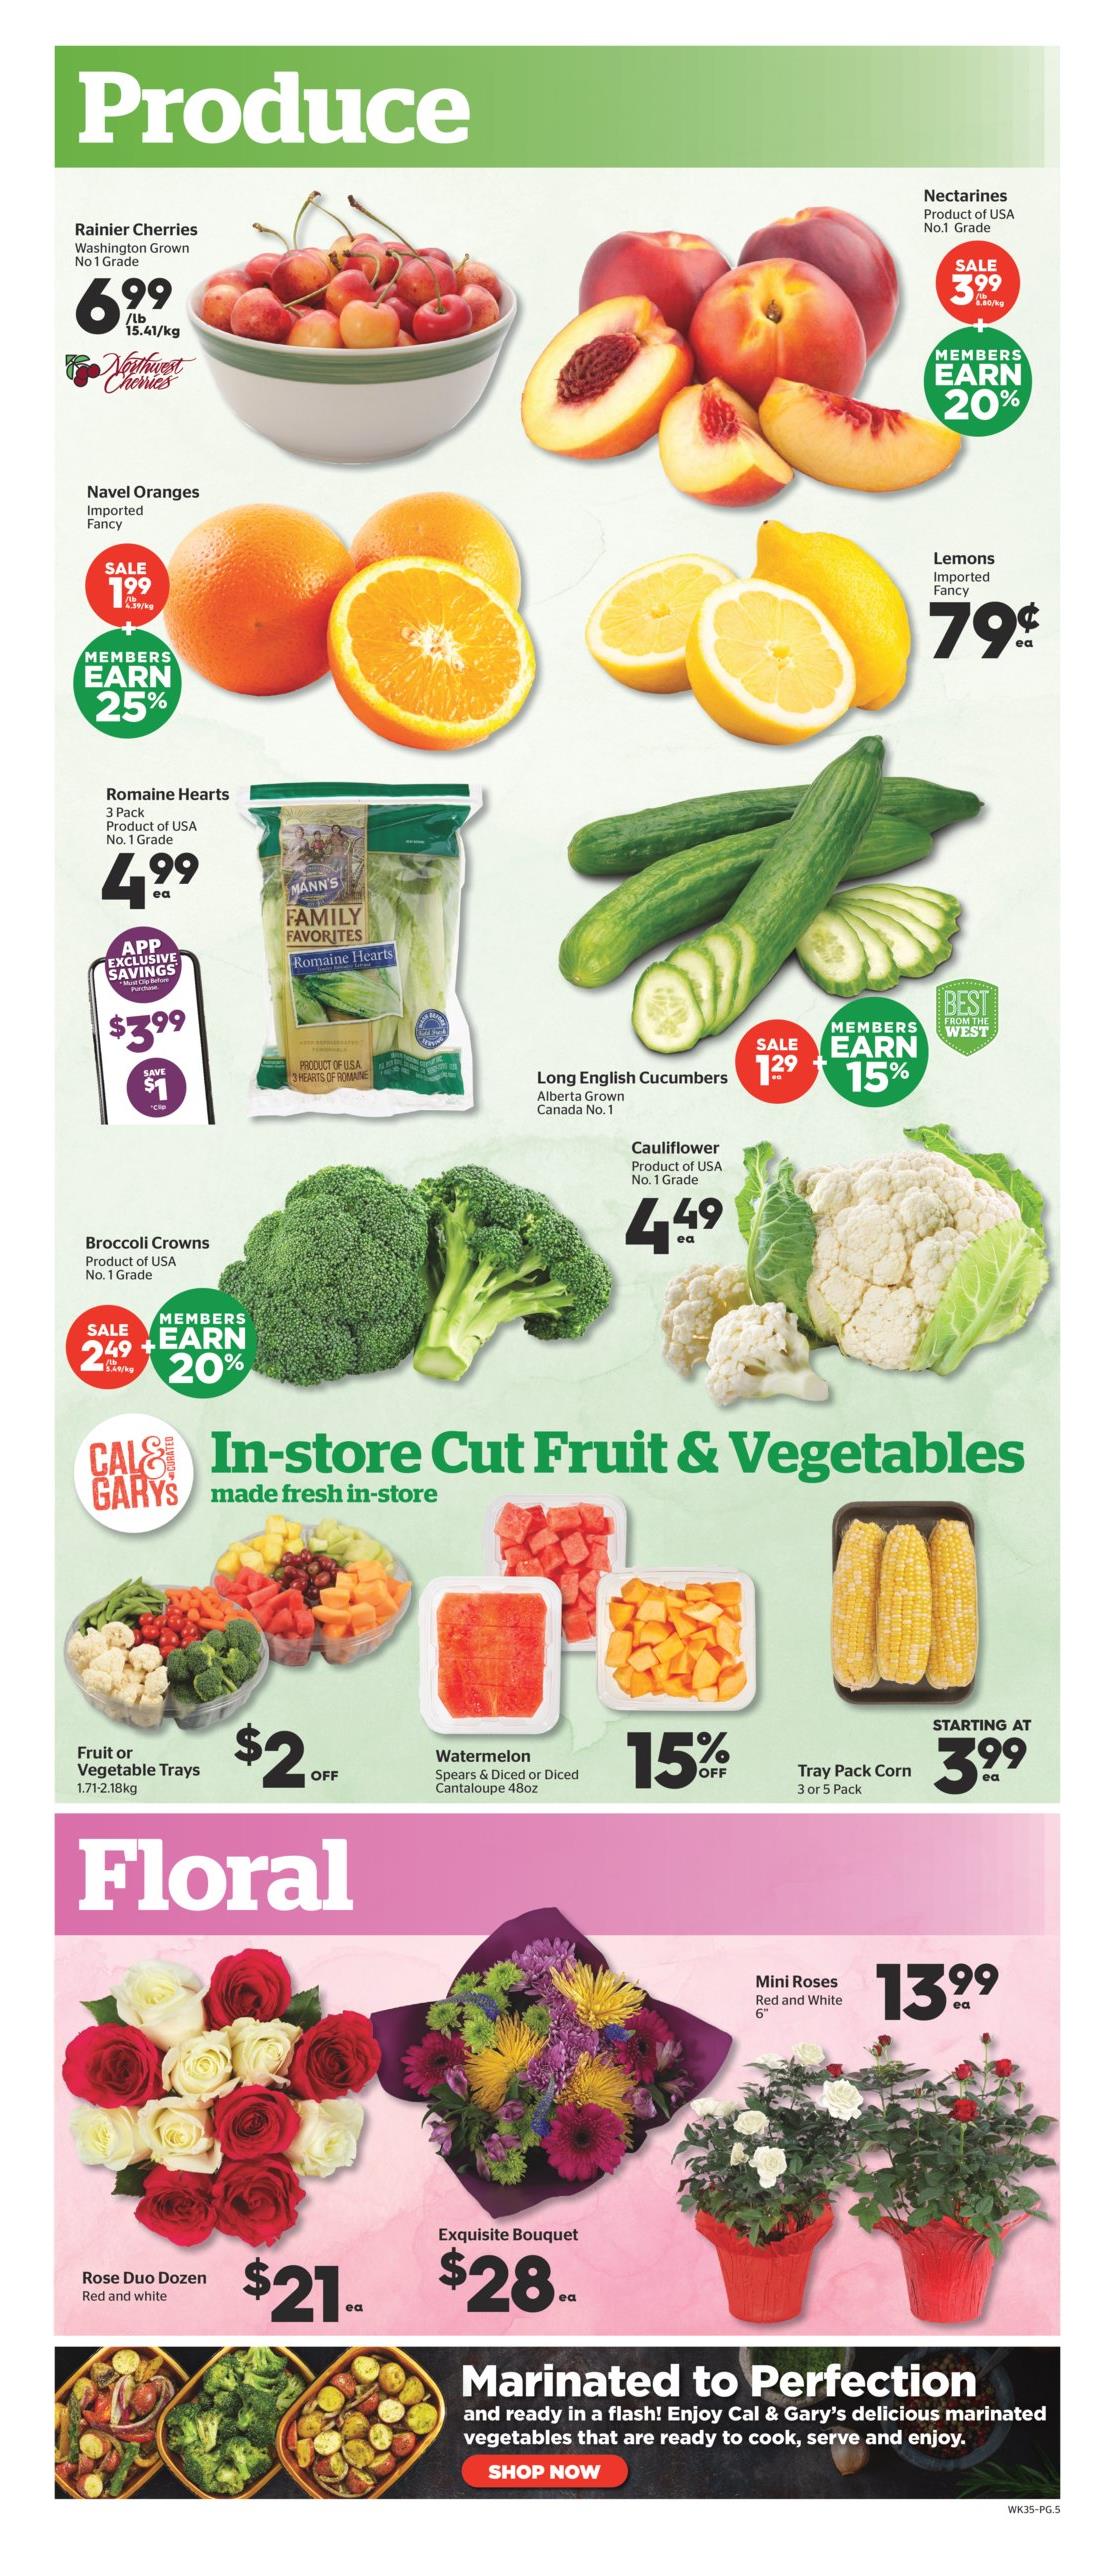 Calgary Co-op - Weekly Flyer Specials - Page 5